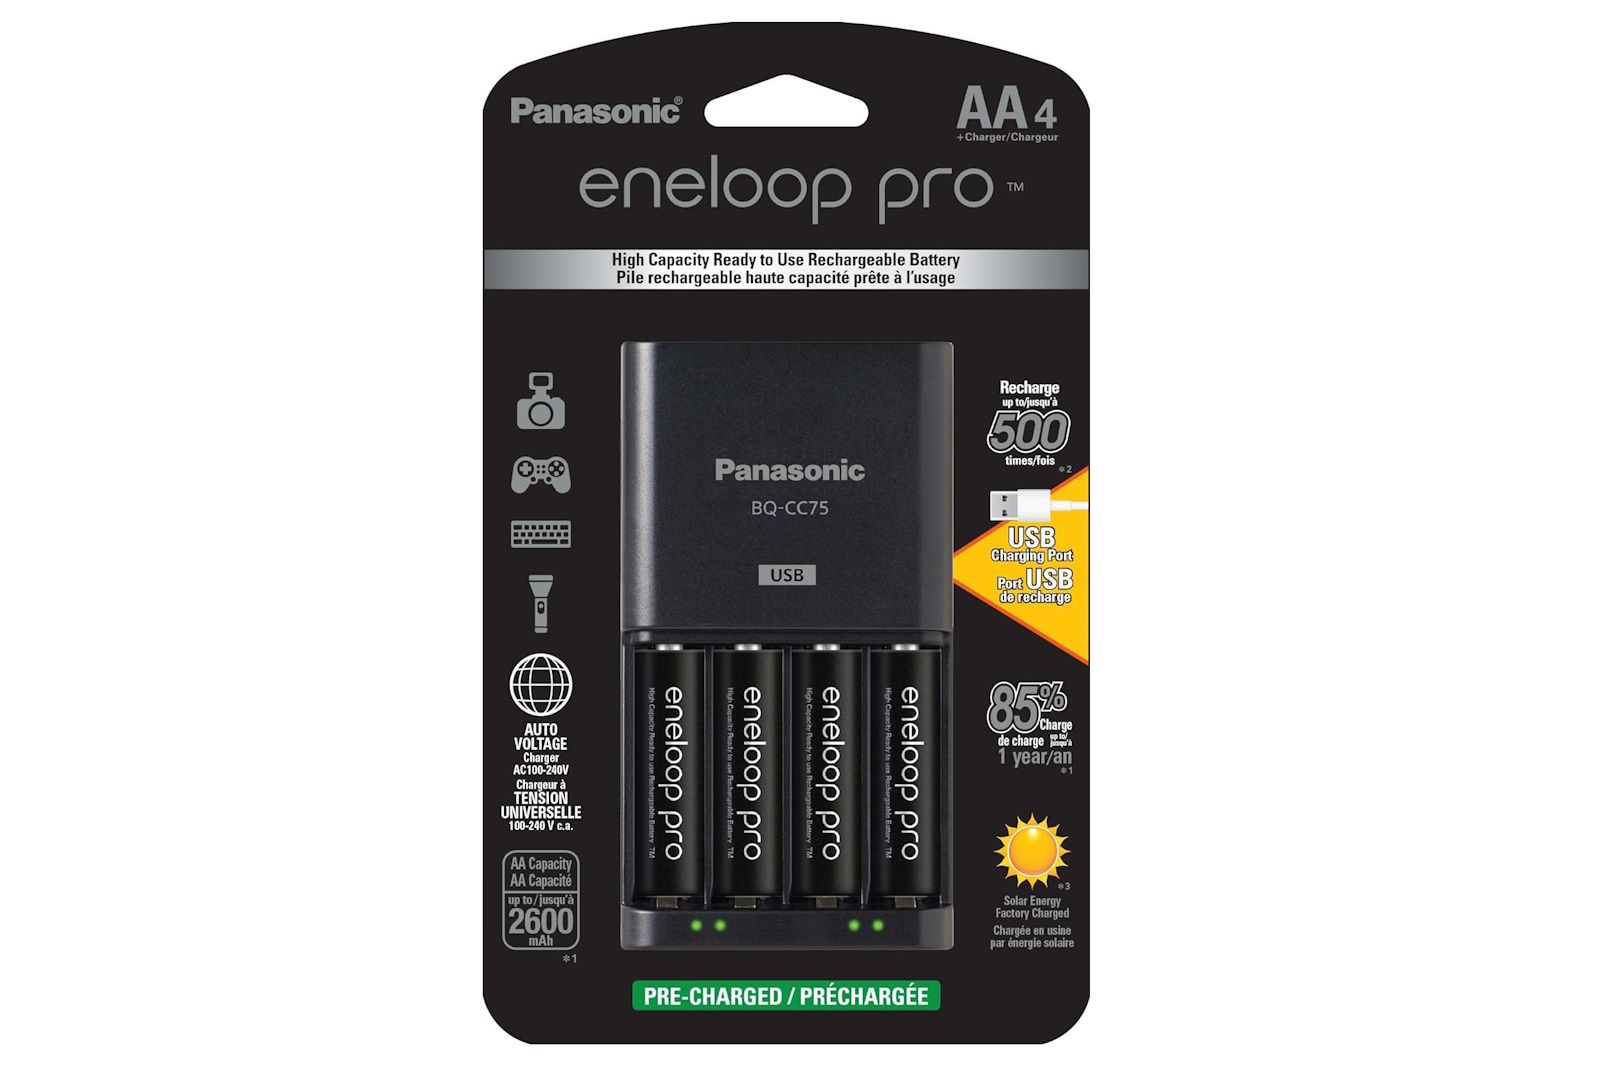 Panasonic Eneloop Advanced Battery charger for AA batteries packaging